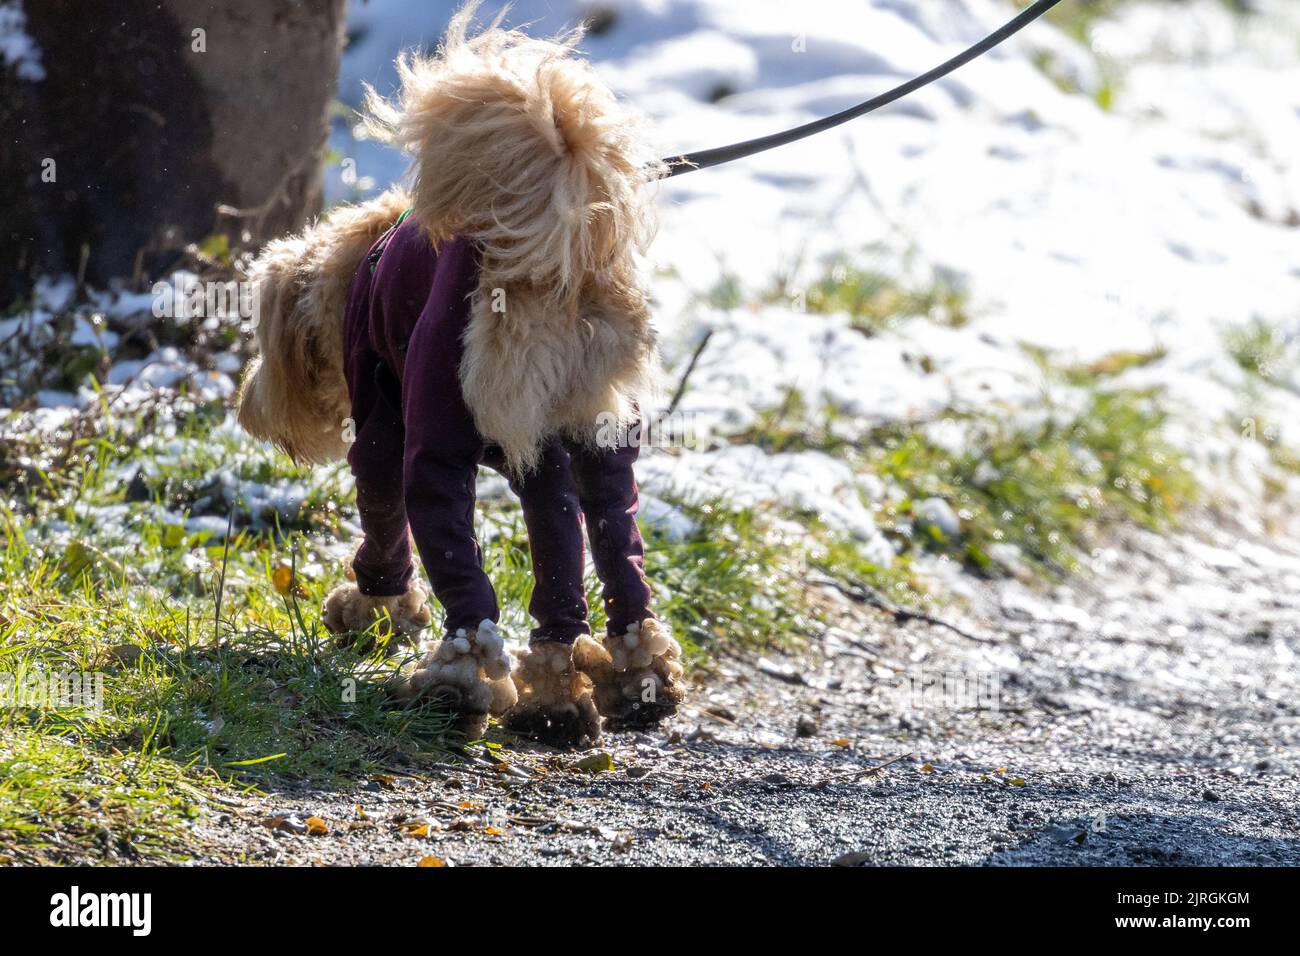 Poodle-cross dog wearing a dog coat on a snowy day with snowballs attached to its feet, UK Stock Photo